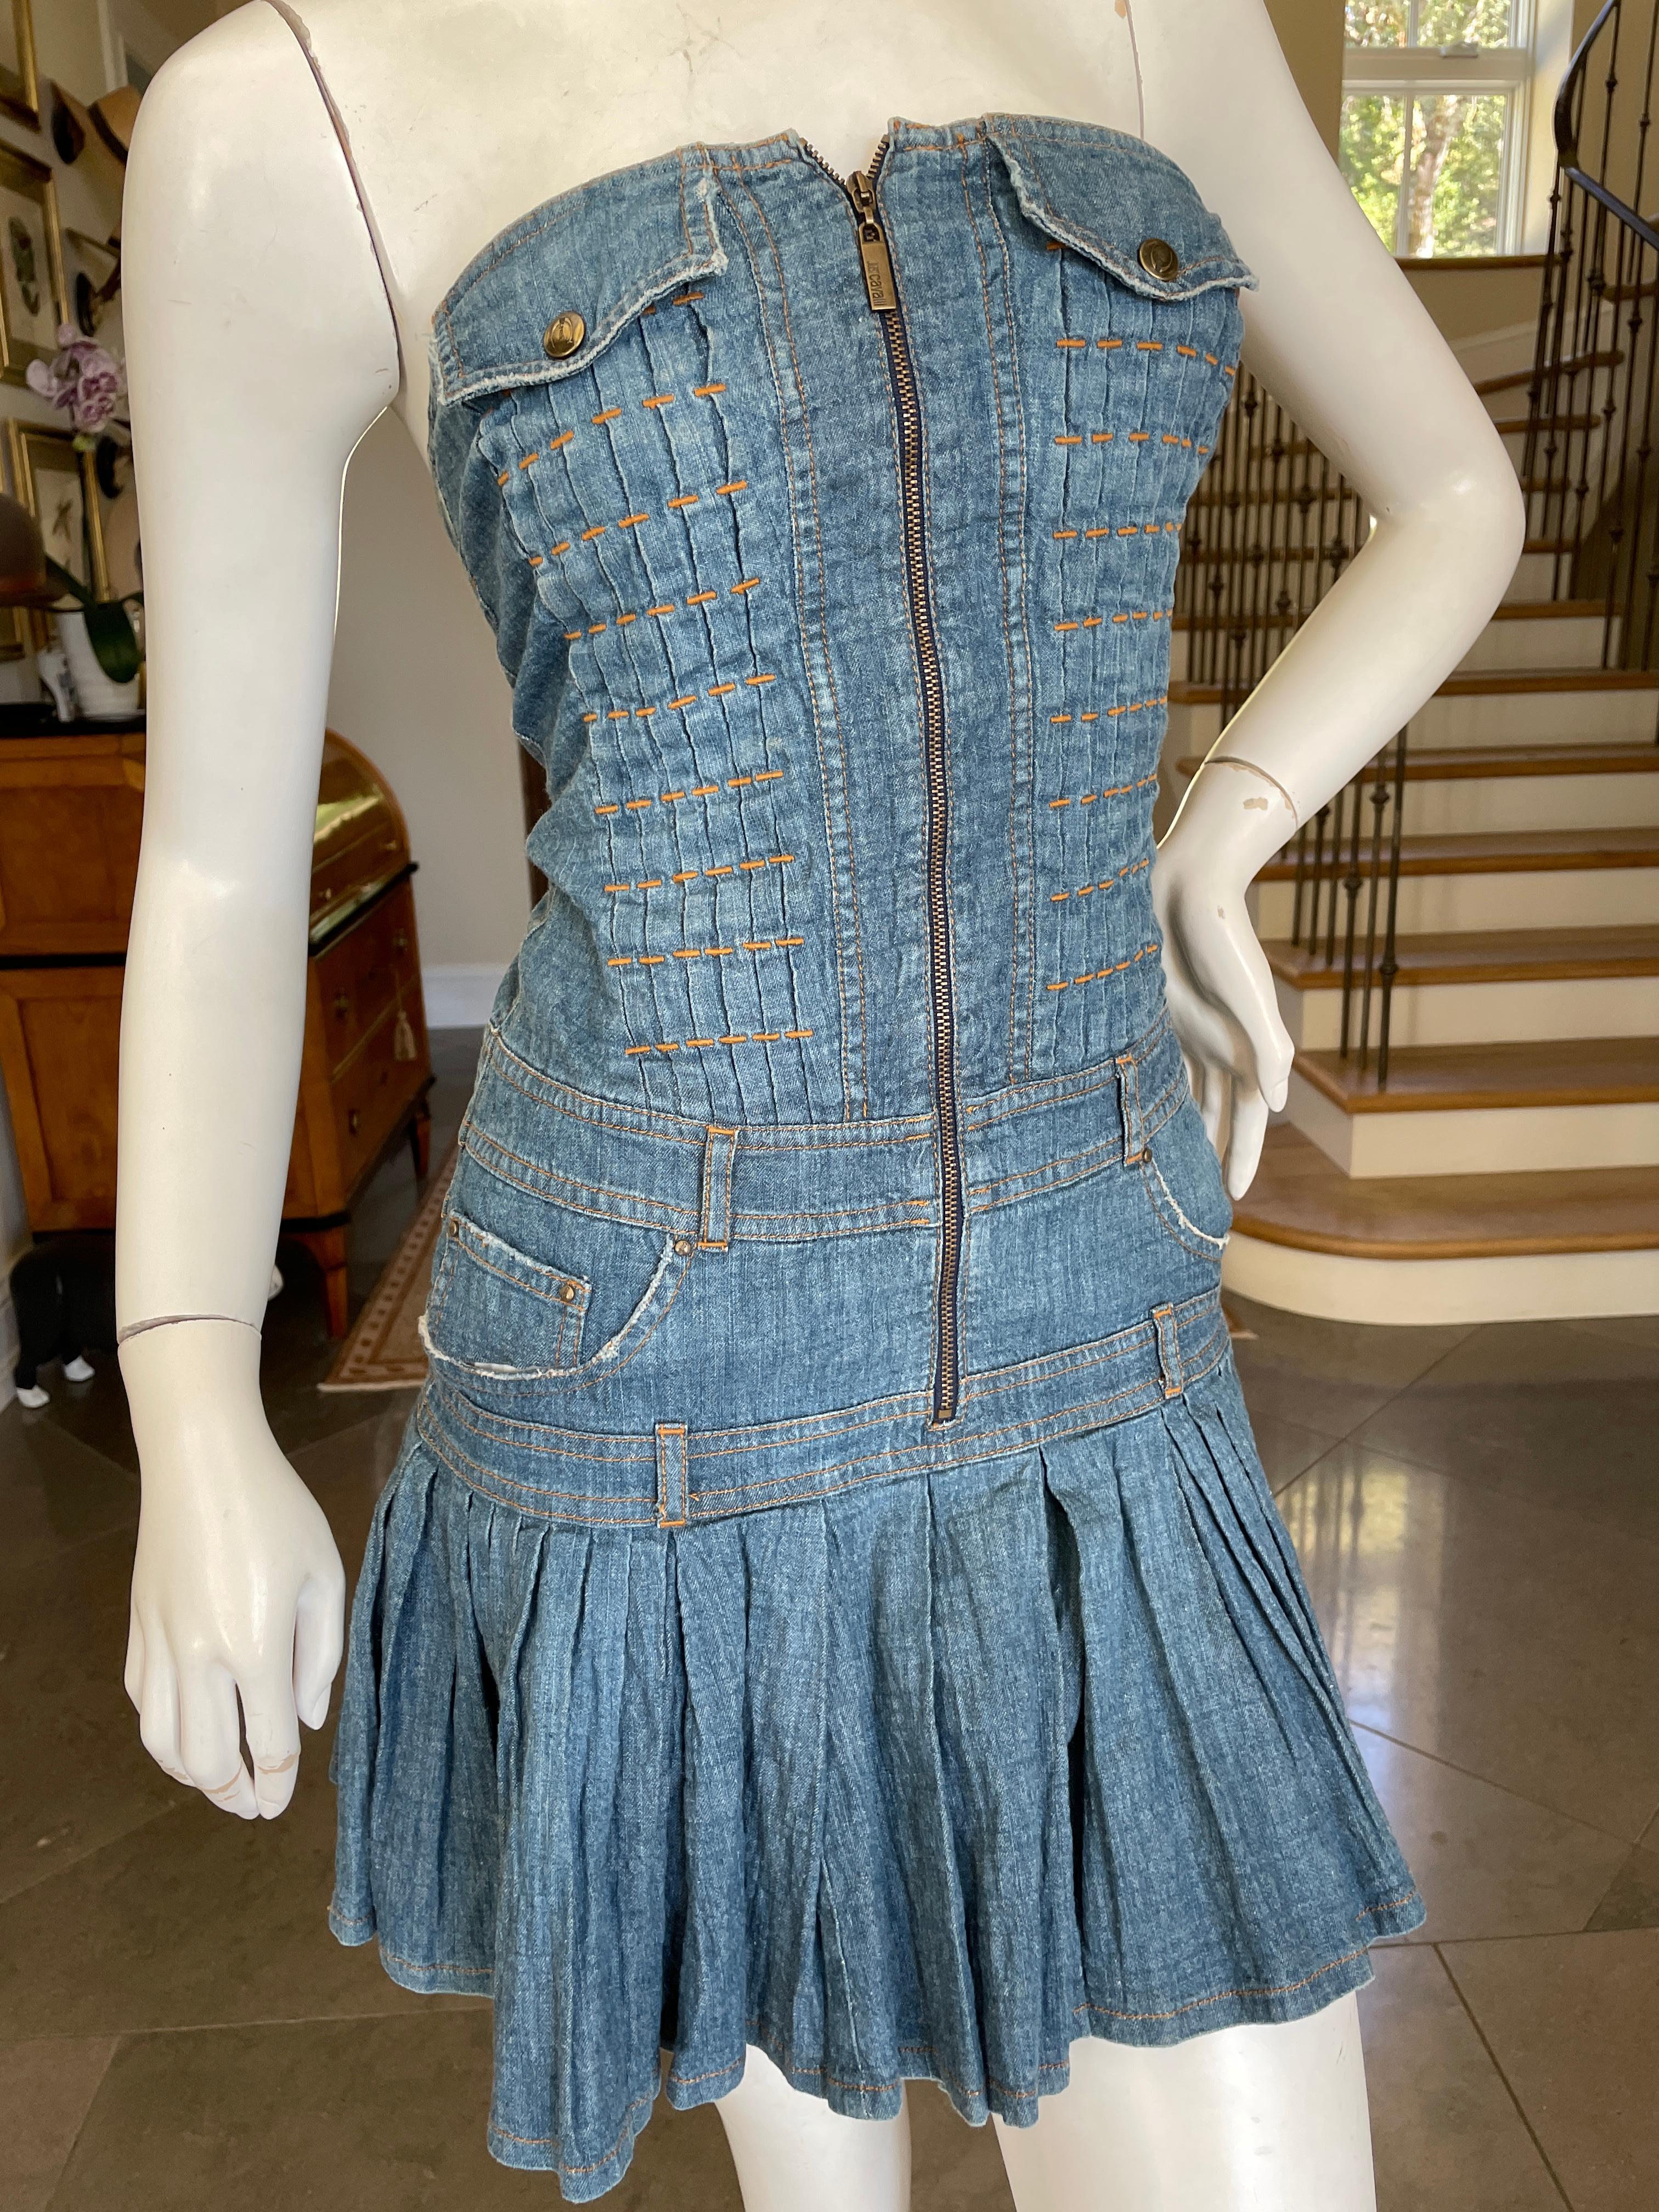 Just Cavalli Vintage Denim Blue Jean Strapless Mini Dress by Roberto Cavalli In Excellent Condition For Sale In Cloverdale, CA